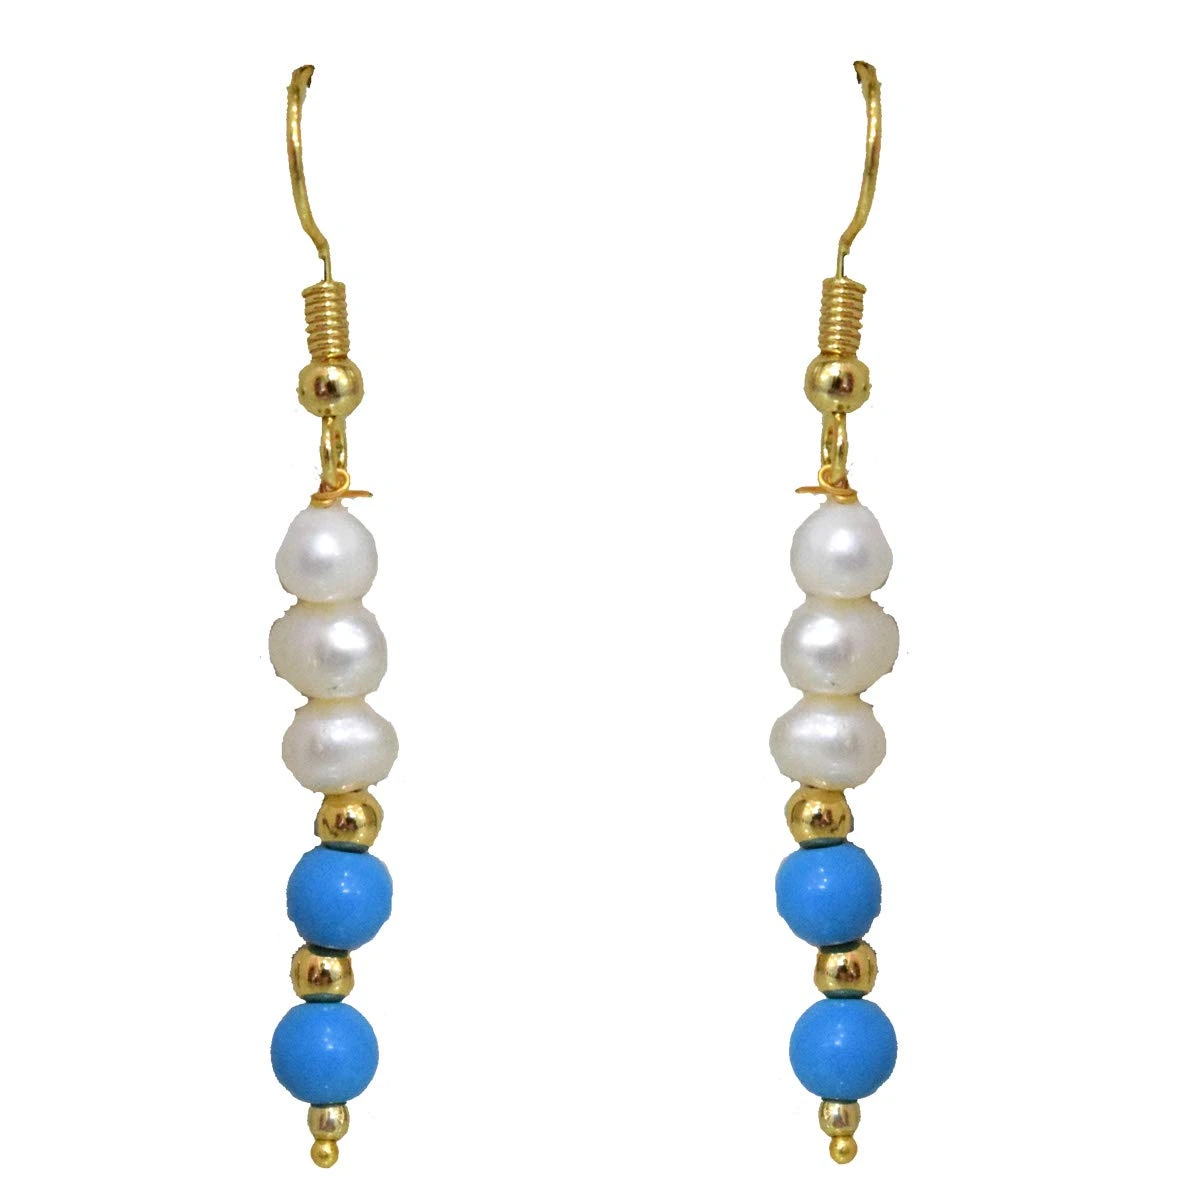 Single Line Real Freshwater Pearl, Gold Plated Beads & Blue Turquoise Beads Necklace, Earrings, Ring, Bracelet Set (SN1022+Ring-4+SB75+SE373)